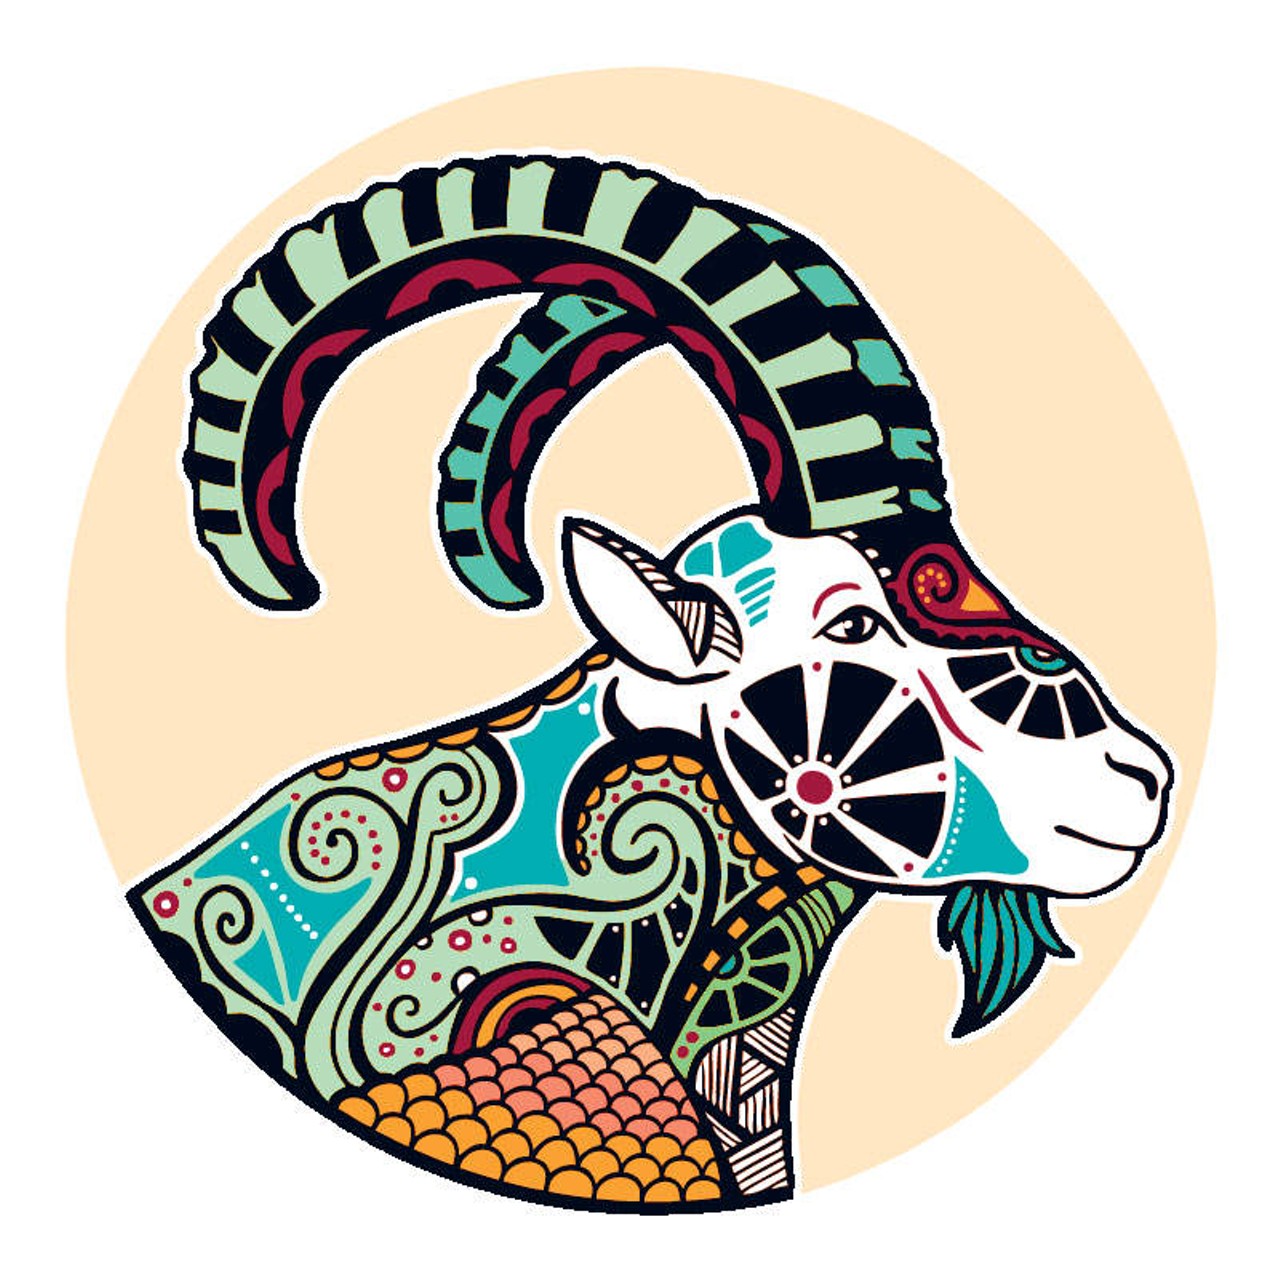 CAPRICORN (Dec. 21-Jan. 20): 
Knowing enough to see the writing on the wall would be easier if you could frame this in light of the past. History has a way of repeating itself. Every 27-30 years we play out the same routine. Smaller cycles of 12 to 15 years are just as noteworthy. In the midst of having your cake and eating it too, the saga continues. Being self-aware enough to look at the facts and come to terms with them will require you to go back in time. Once you connect the dots, the precariousness of your situation will open your eyes to the pattern, and to the ways in which both you and it need to change.